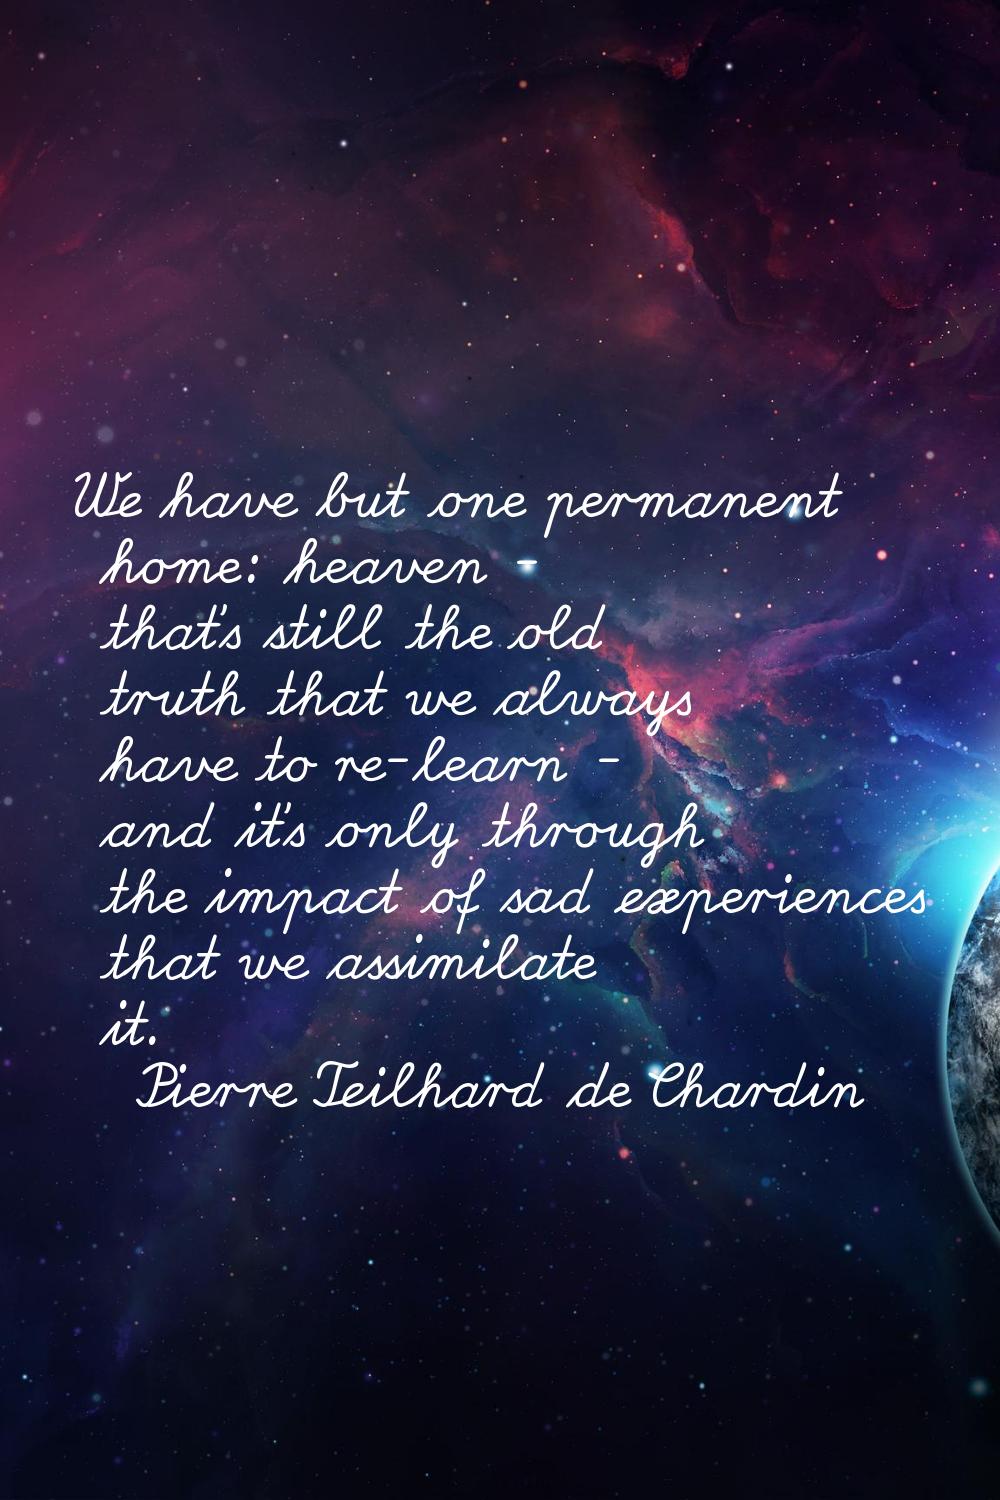 We have but one permanent home: heaven - that's still the old truth that we always have to re-learn